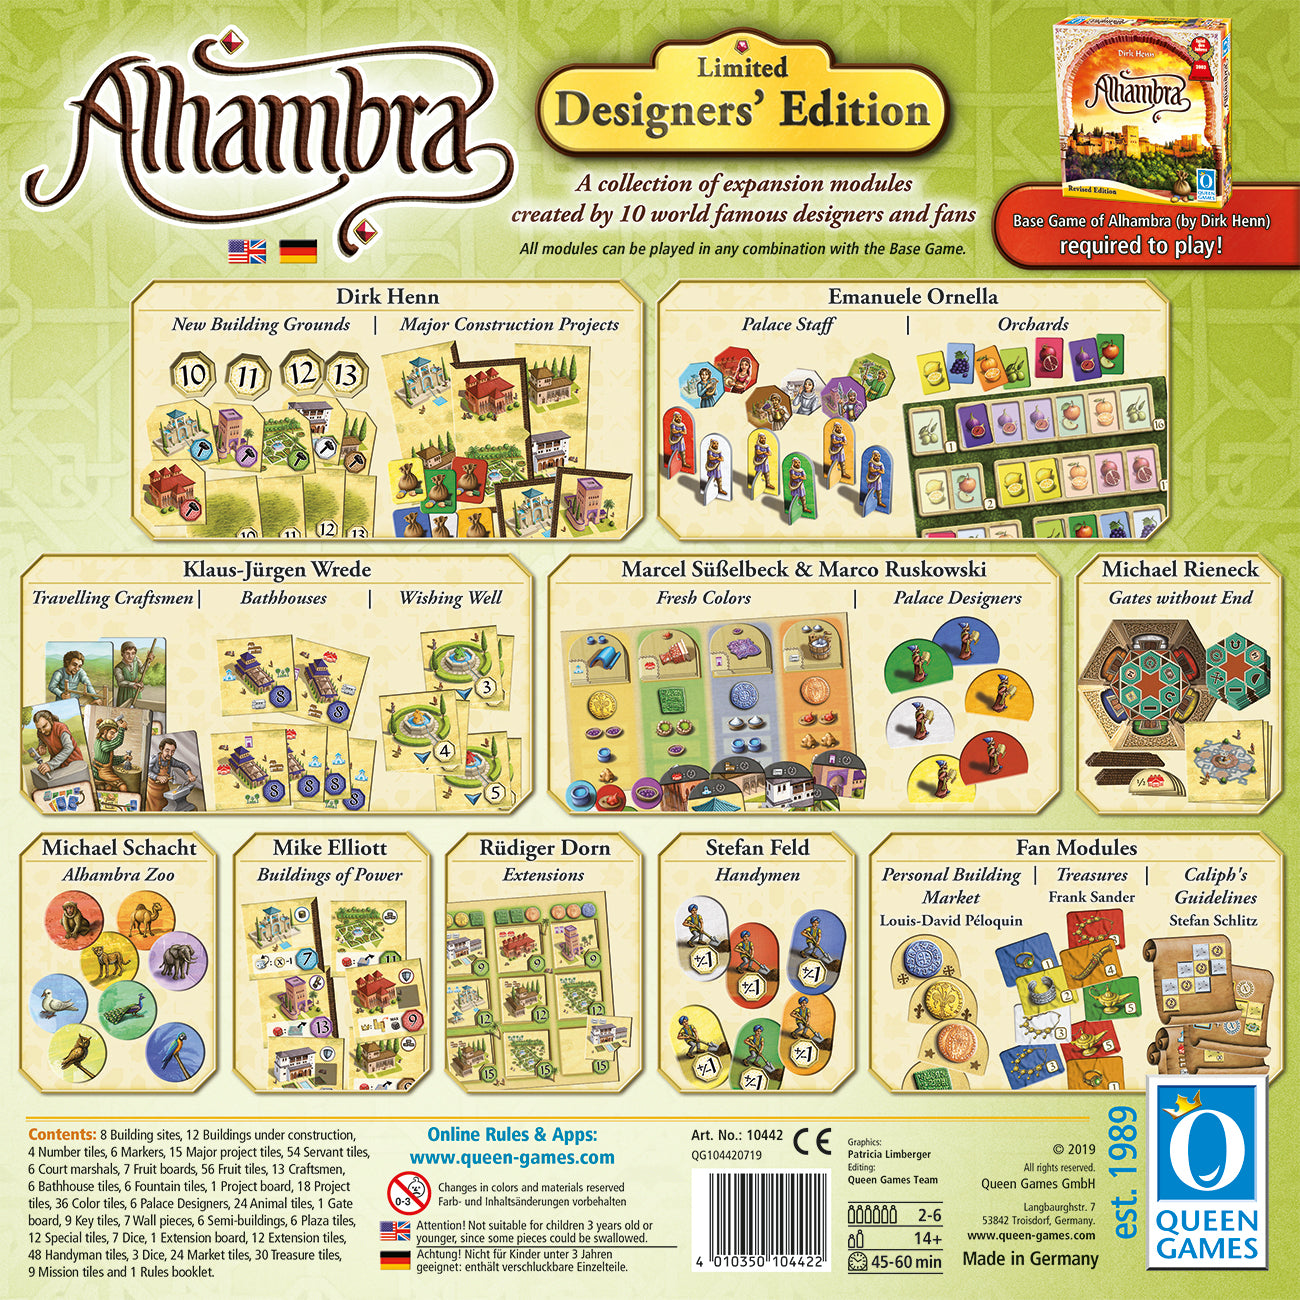 Graphic of back of Alhambra "Designers Edition" game box.